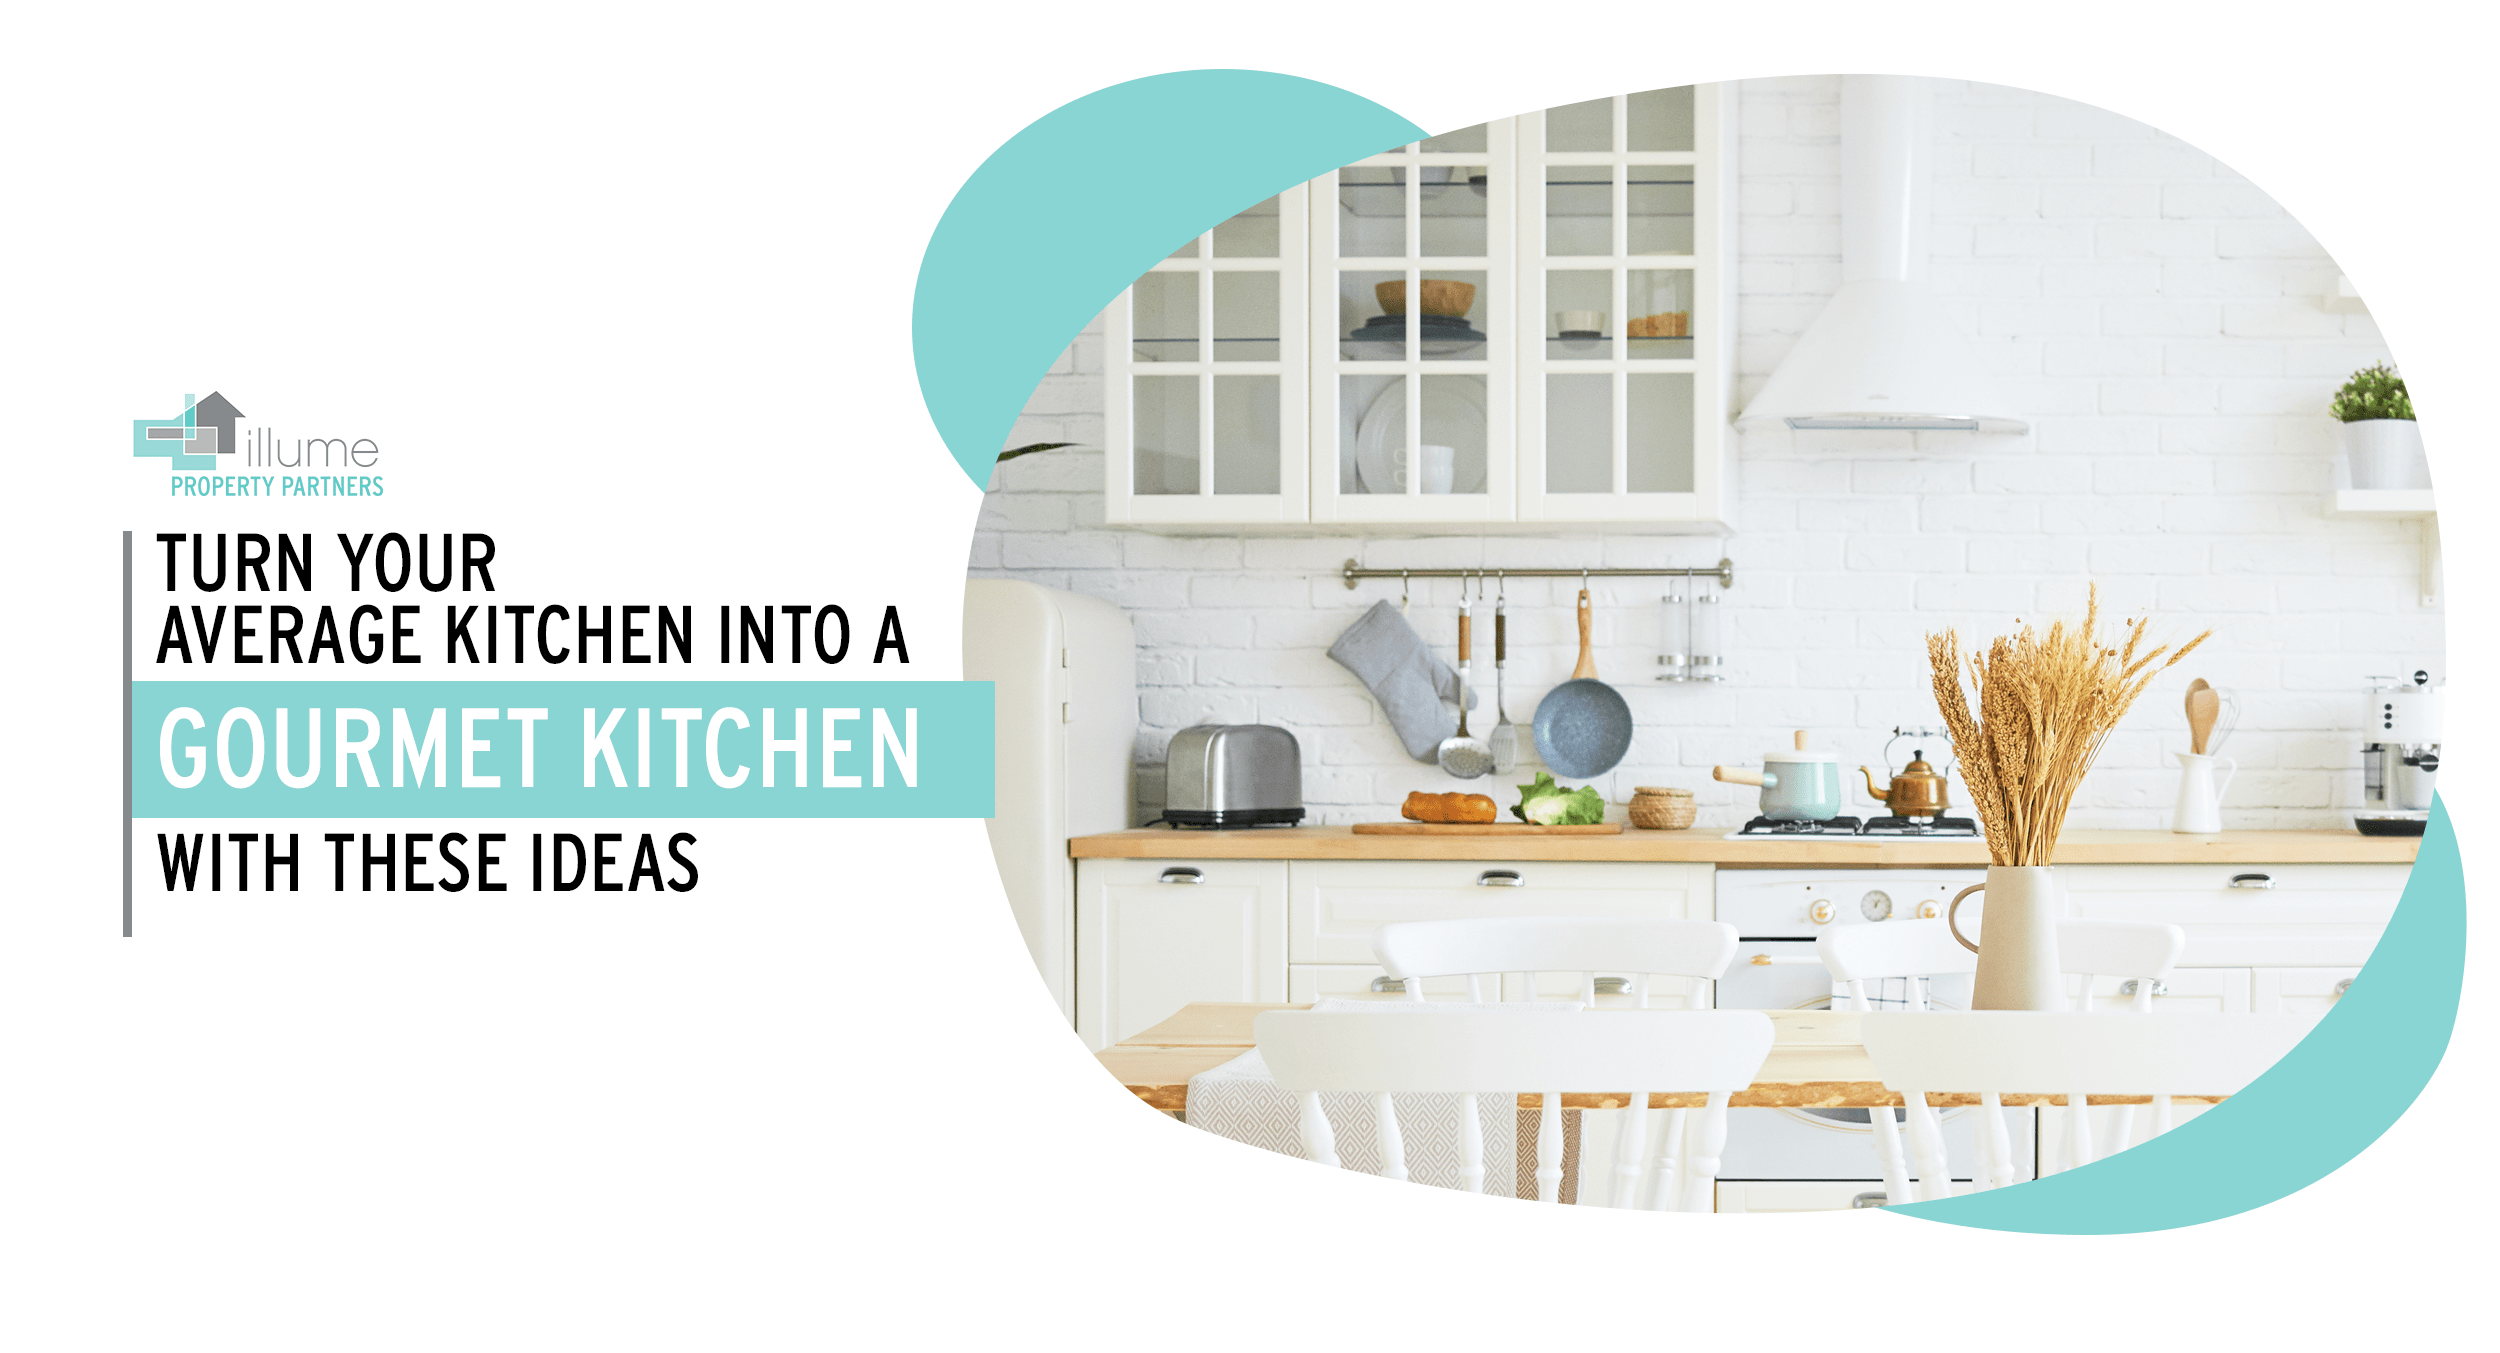 Turn Your Average Kitchen into a Gourmet Kitchen with These Ideas